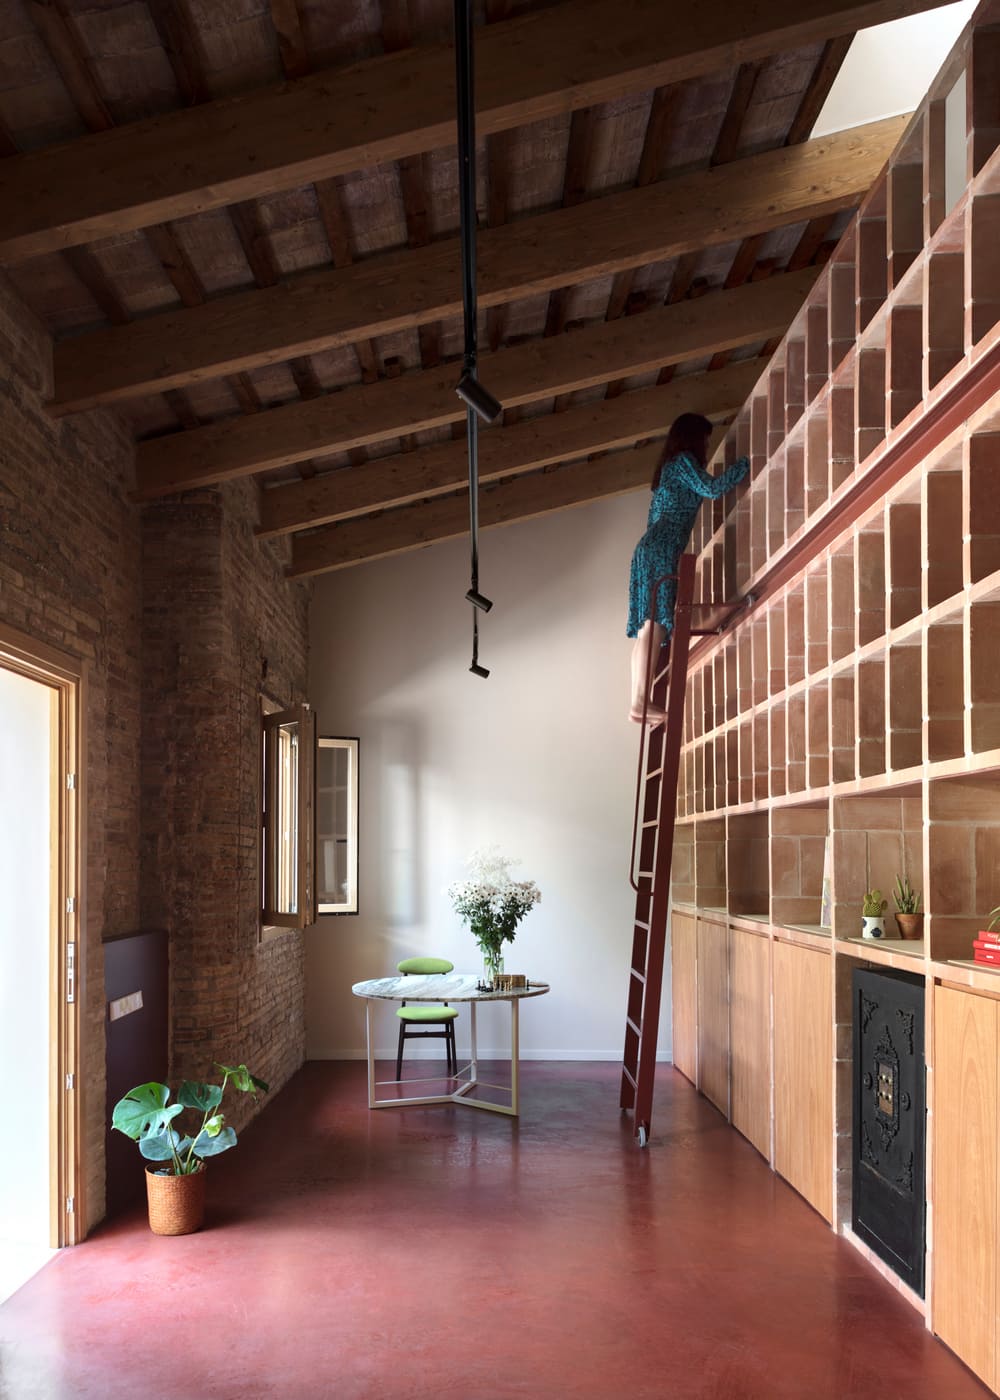 Bioclimatic and Passive Restoration of a House in Barcelona